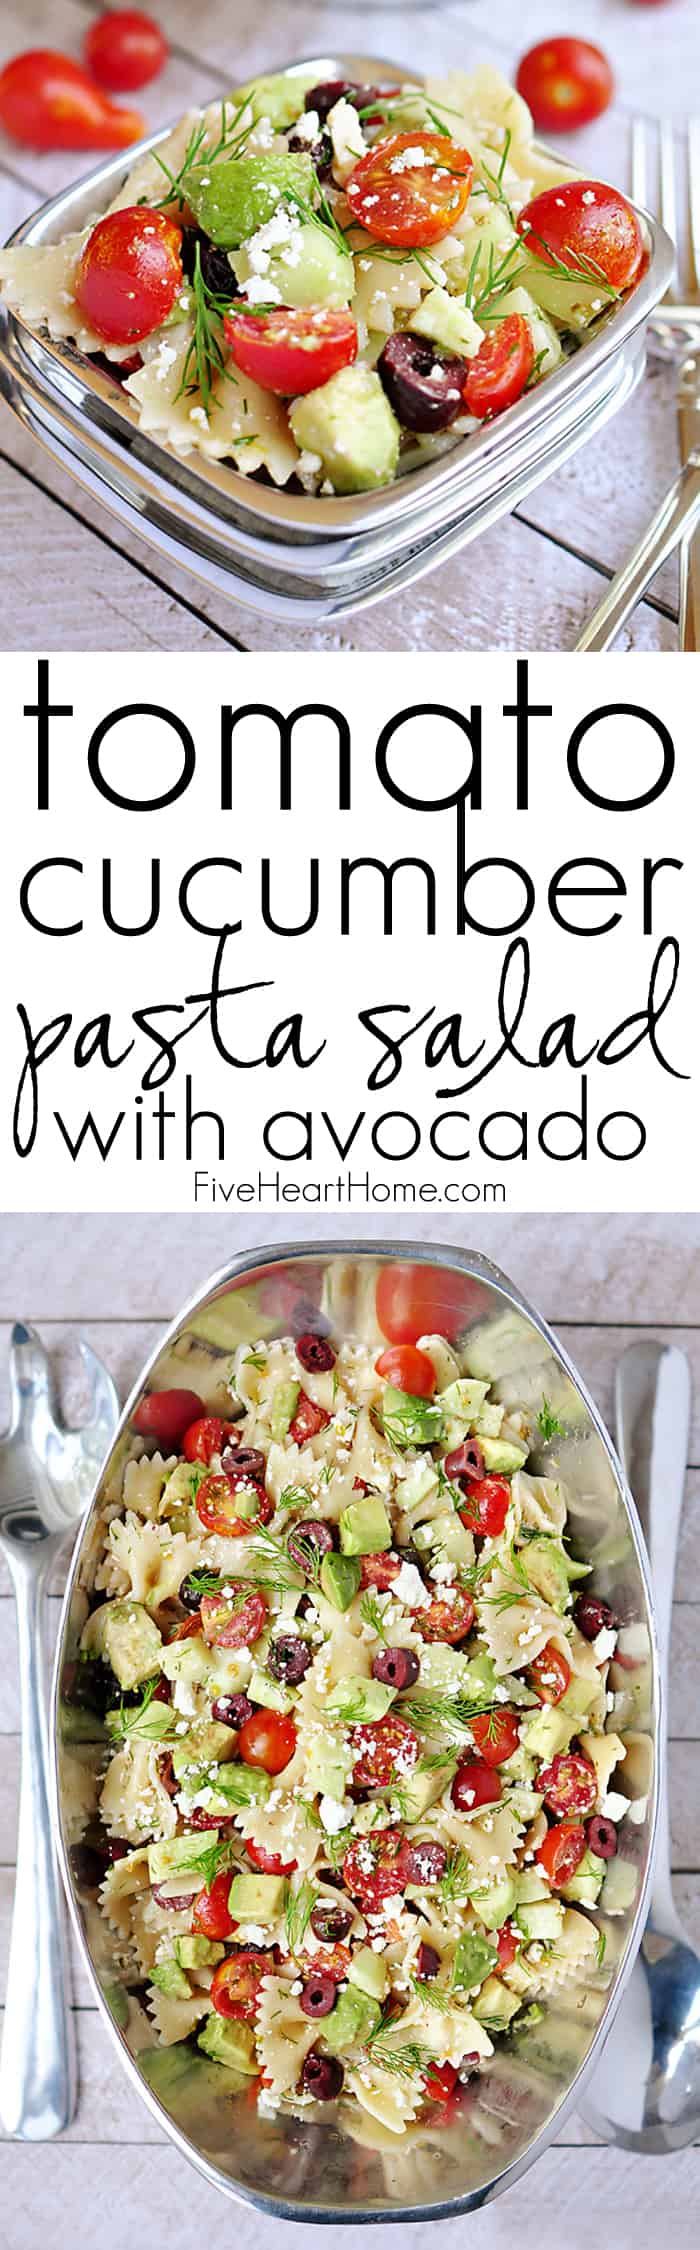 Tomato Cucumber Pasta Salad with Avocado ~ this amazing pasta salad also features Kalamata olives, Feta, and fresh dill for a flavorful summer side! | FiveHeartHome.com via @fivehearthome